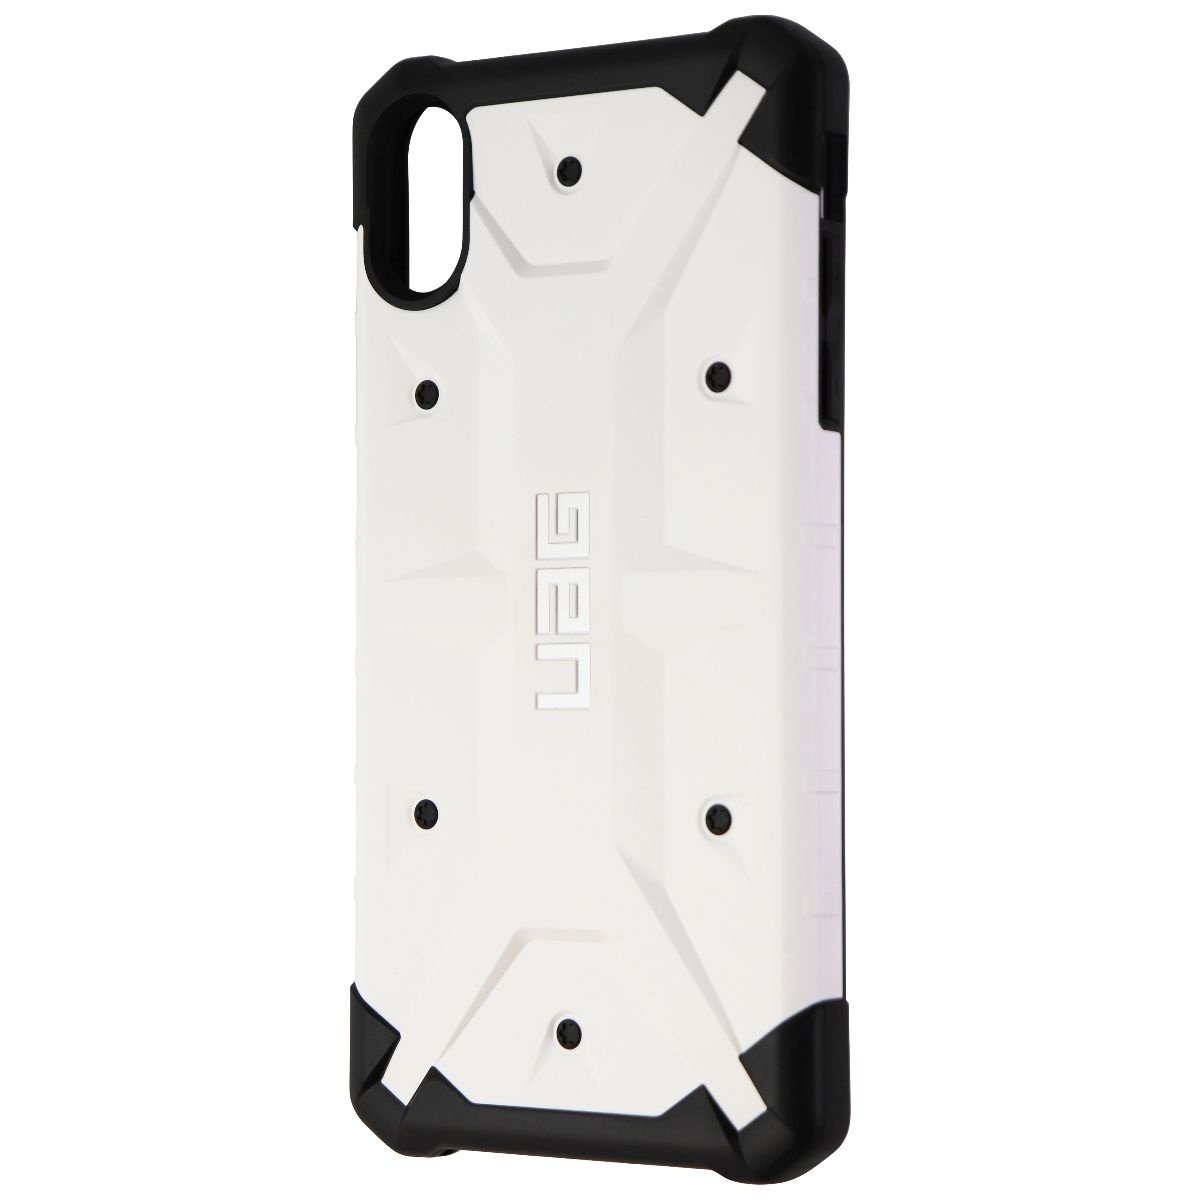 Under Armor Gear Pathfinder Series For IPhone XS Max - White / Black